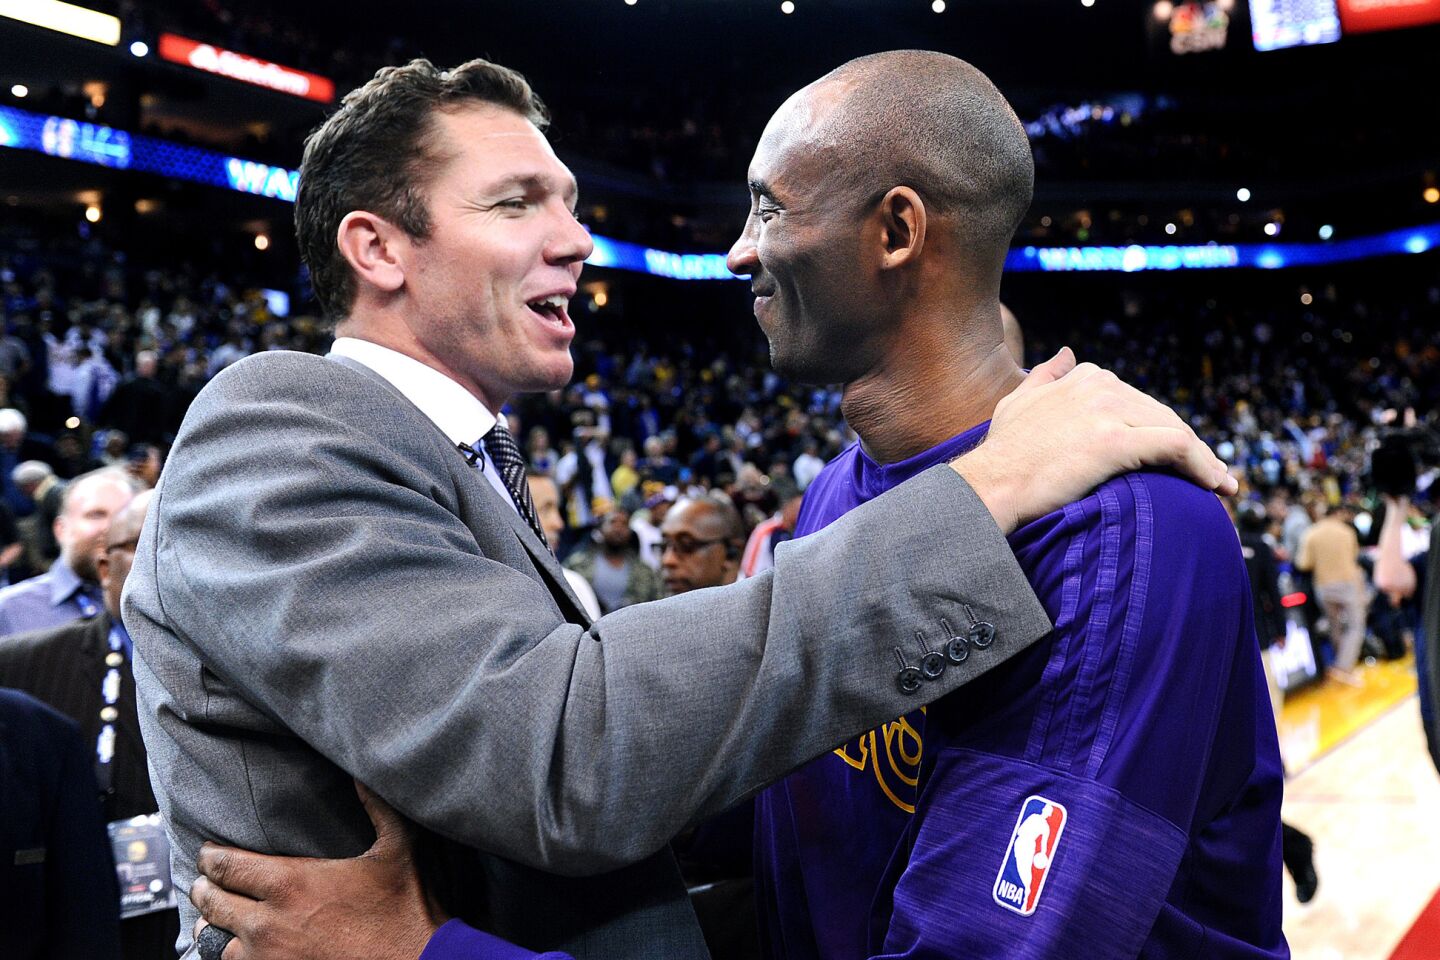 Kobe Bryant hugs former Lakers teammateand current Warriors assistant coach Luke Walton after a game in Oakland on Jan. 14, 2016.